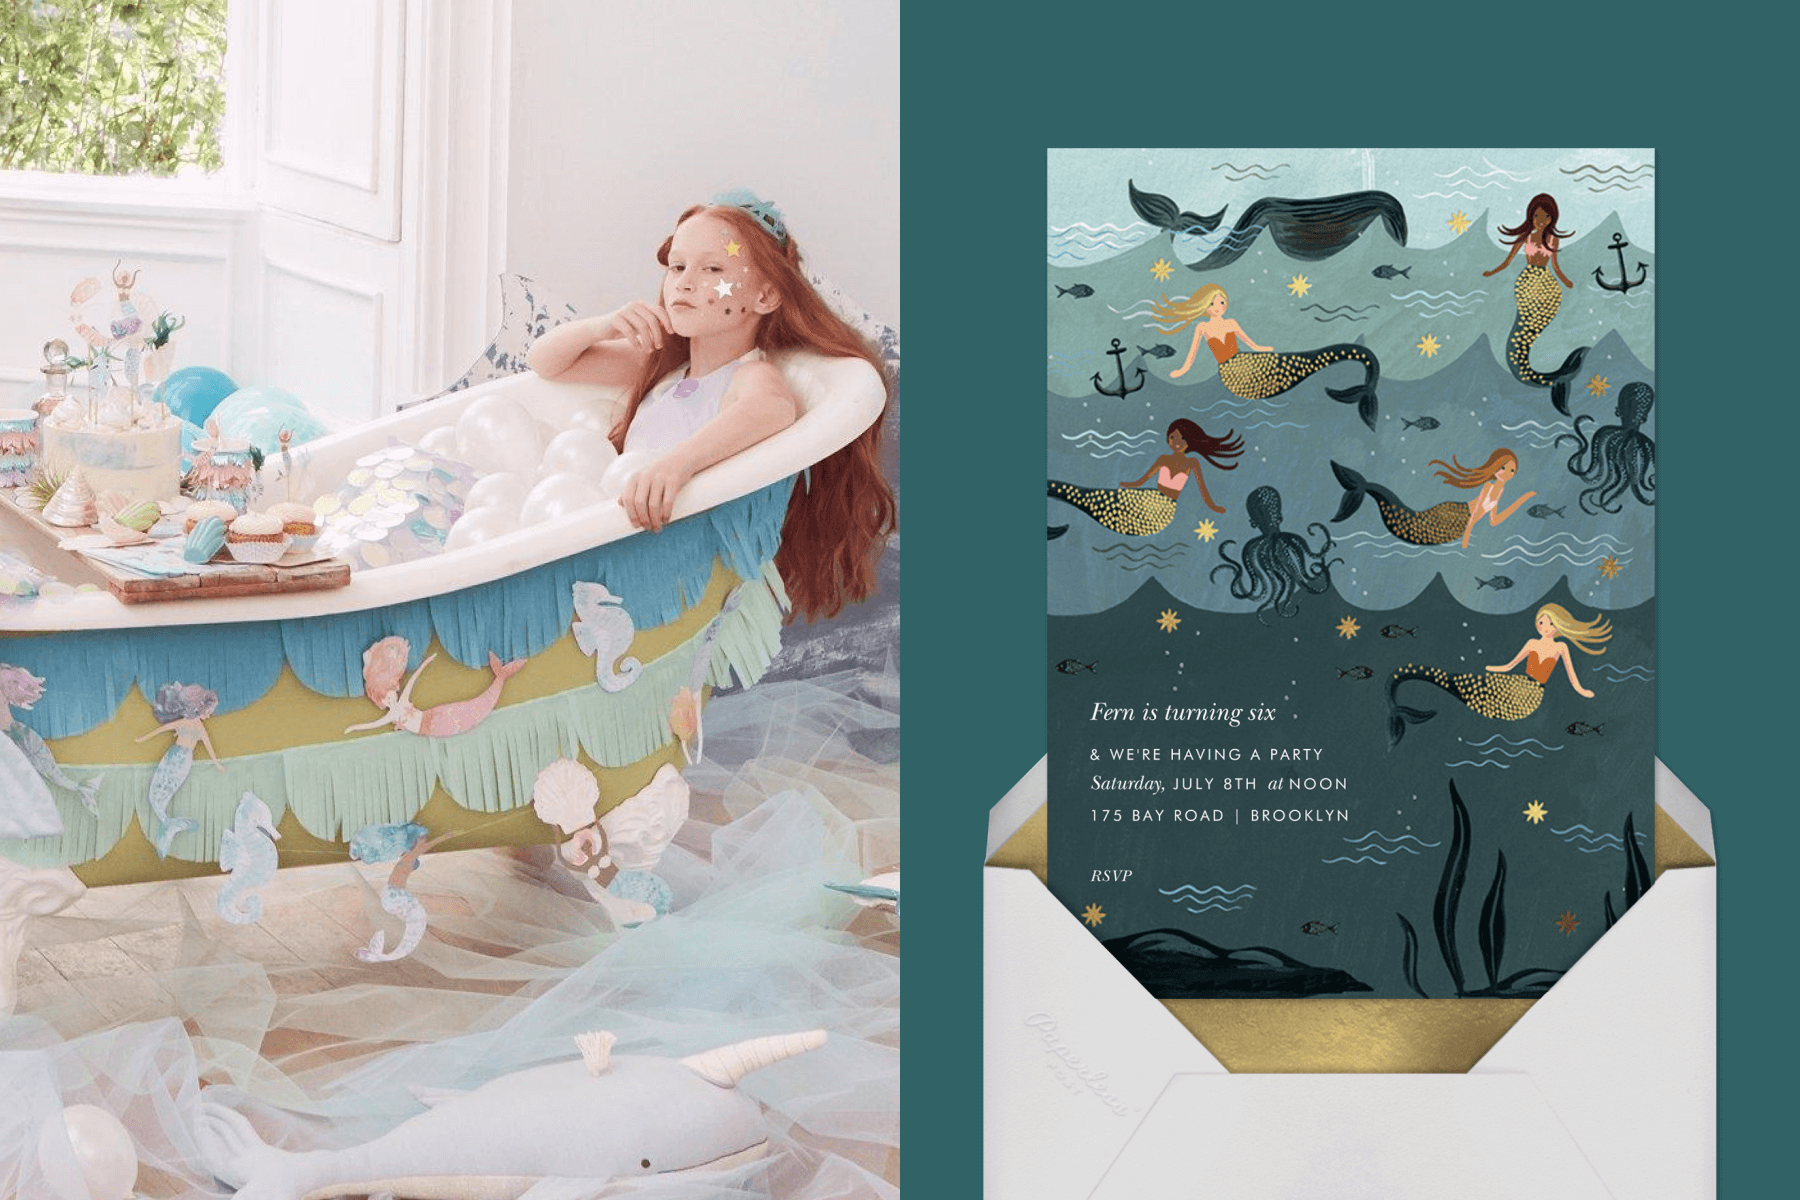 A young girl in a claw-foot bath tub decorated with mermaid party supplies. Right: A birthday invitation with mermaids and sea creatures in the ocean.